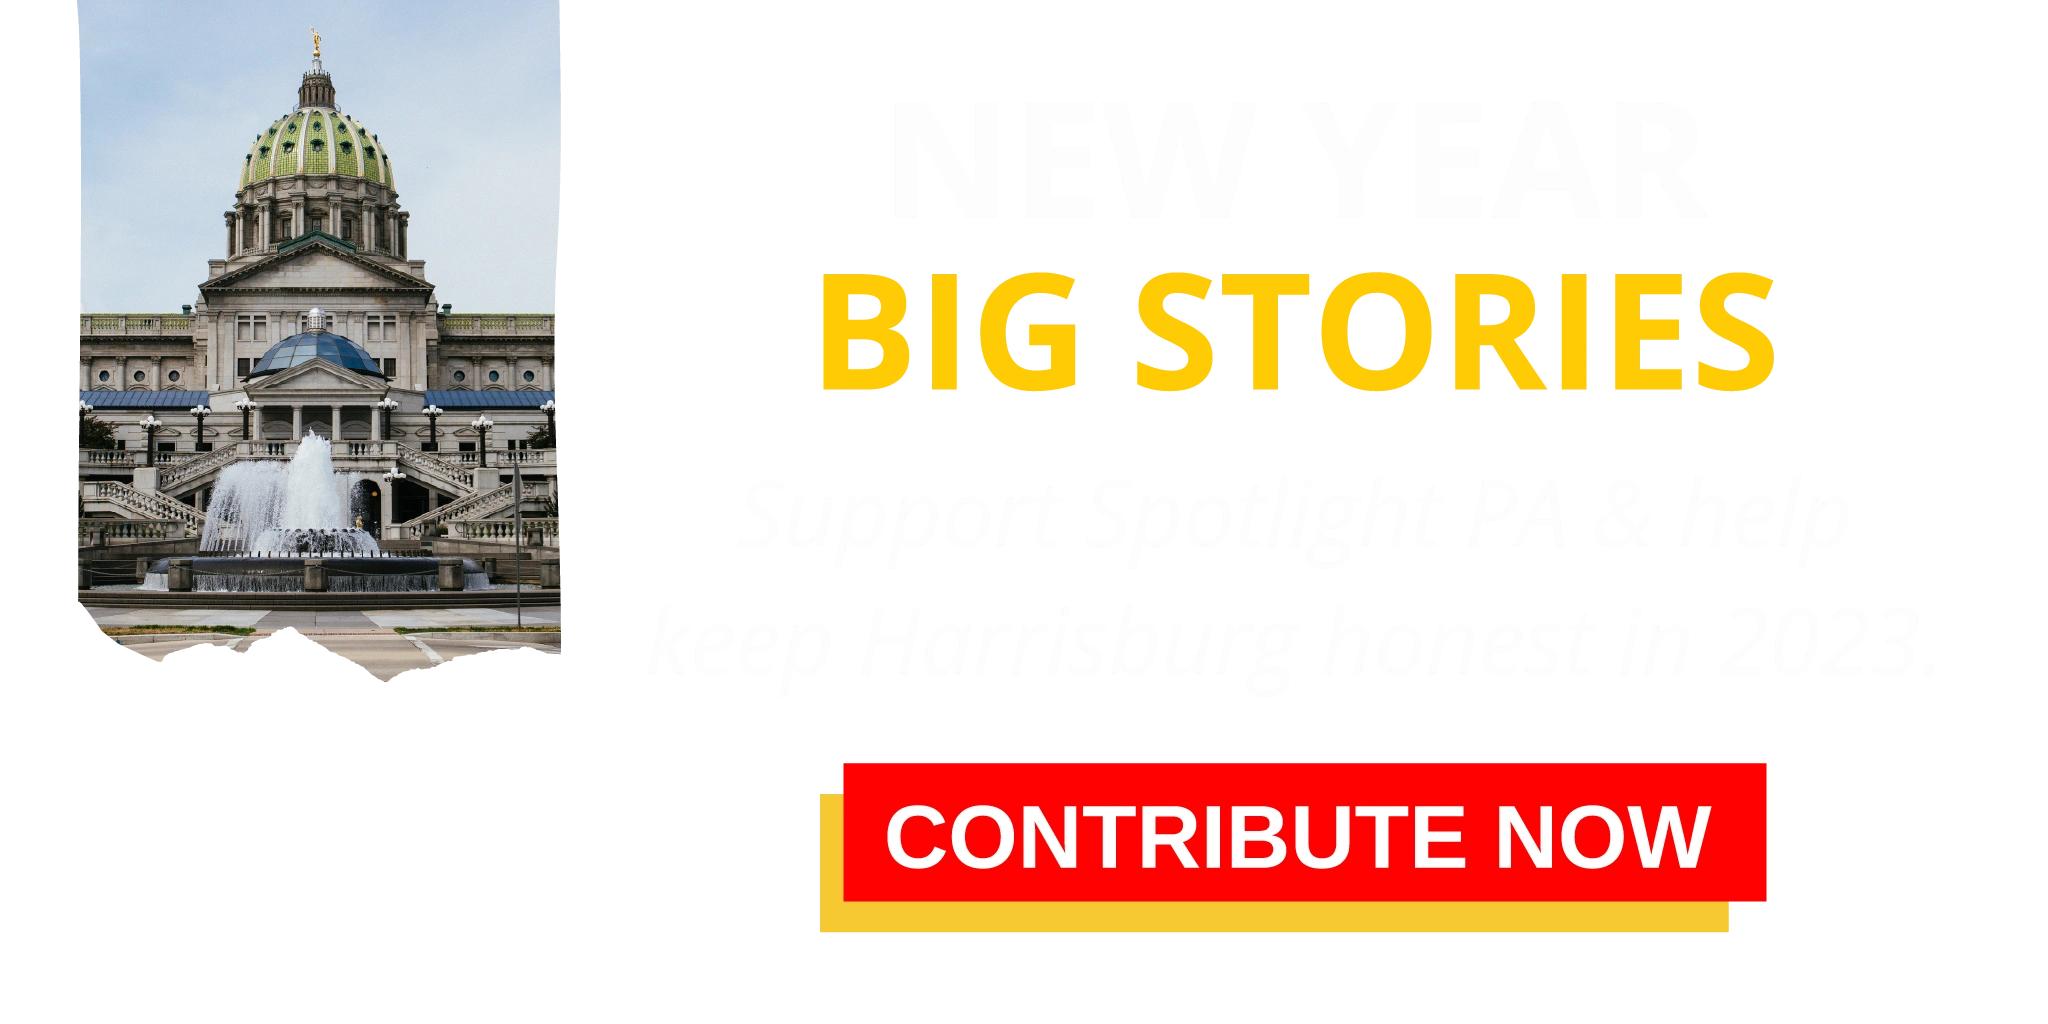 This new year, pledge to support vital investigative journalism that strengthens our democracy.